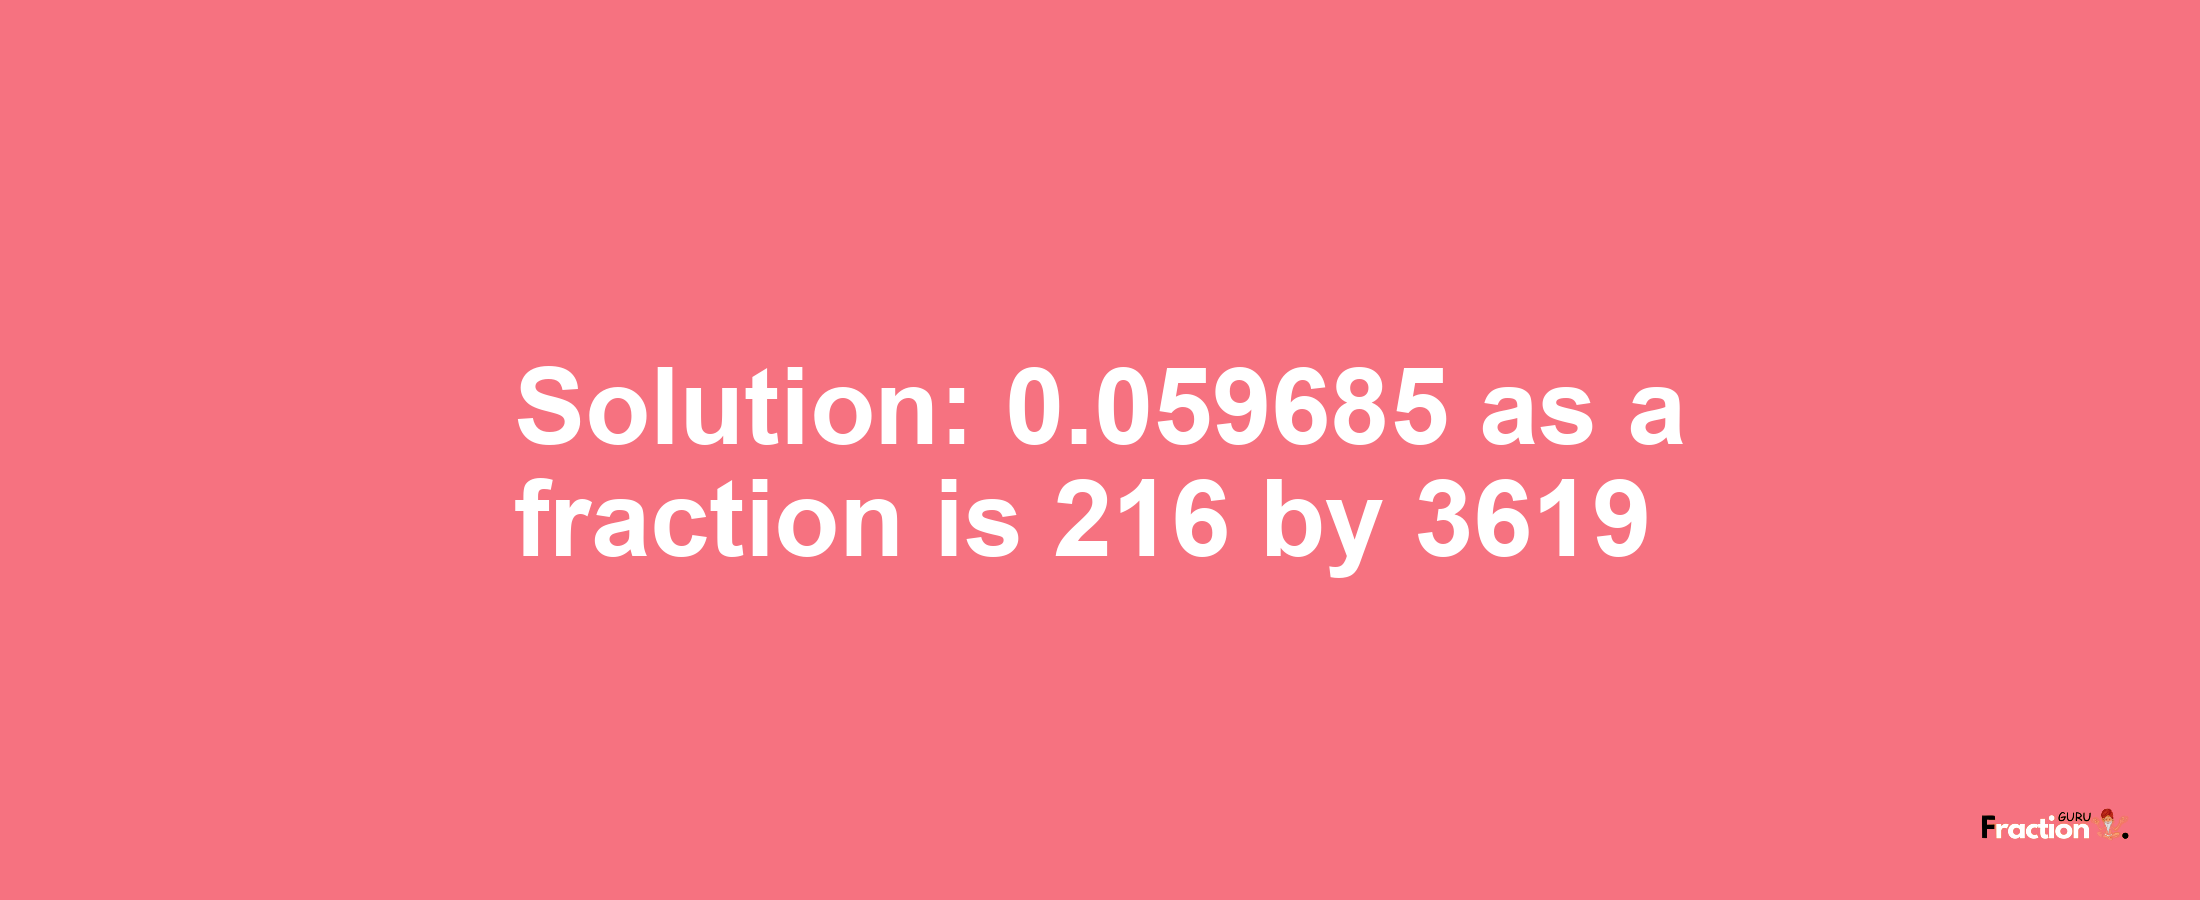 Solution:0.059685 as a fraction is 216/3619